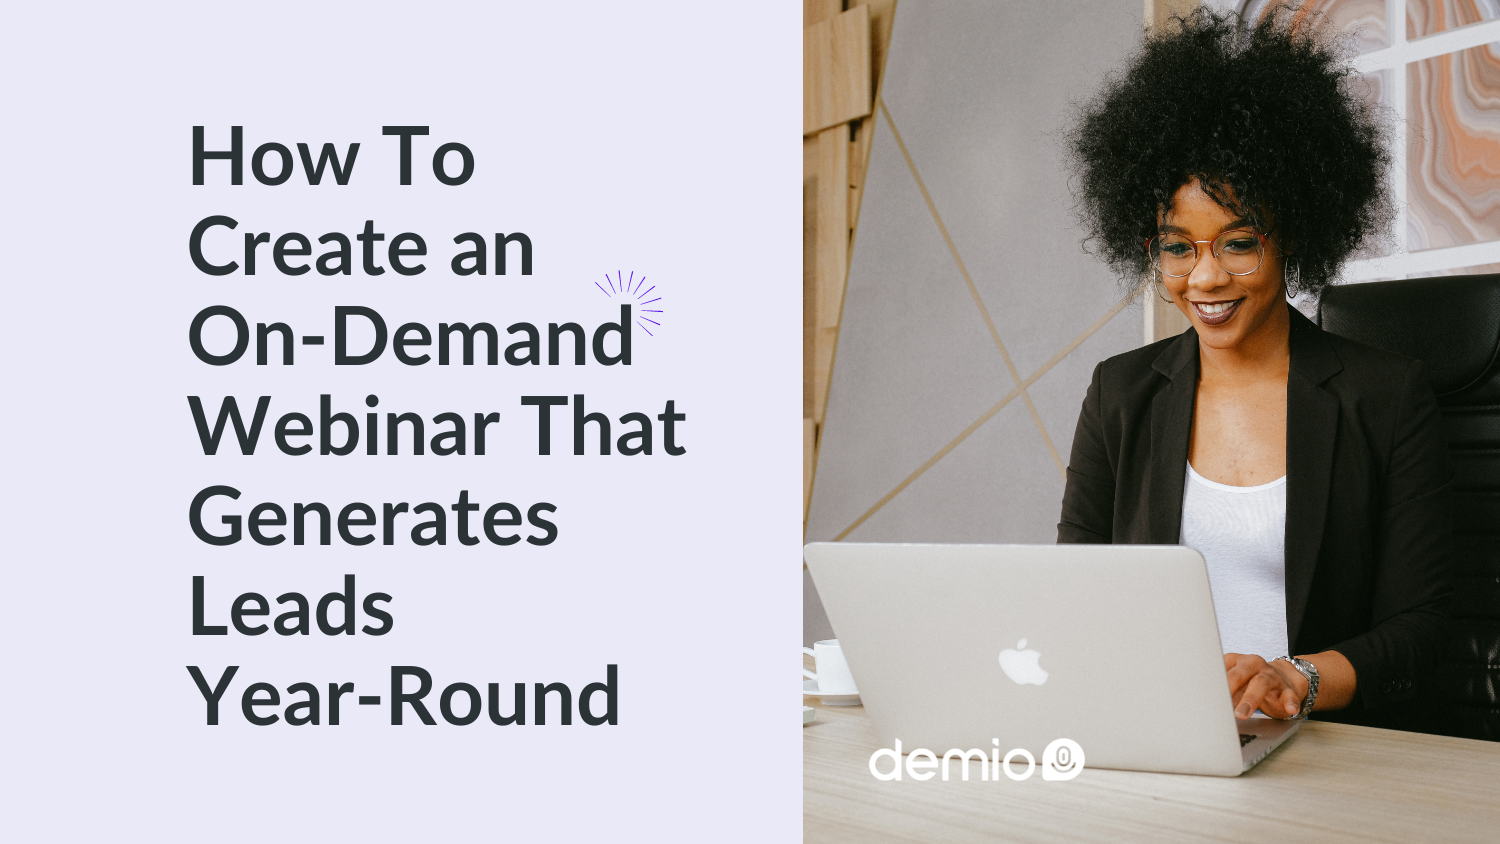 How To Create On-Demand Webinar That Generates Leads Year-Round